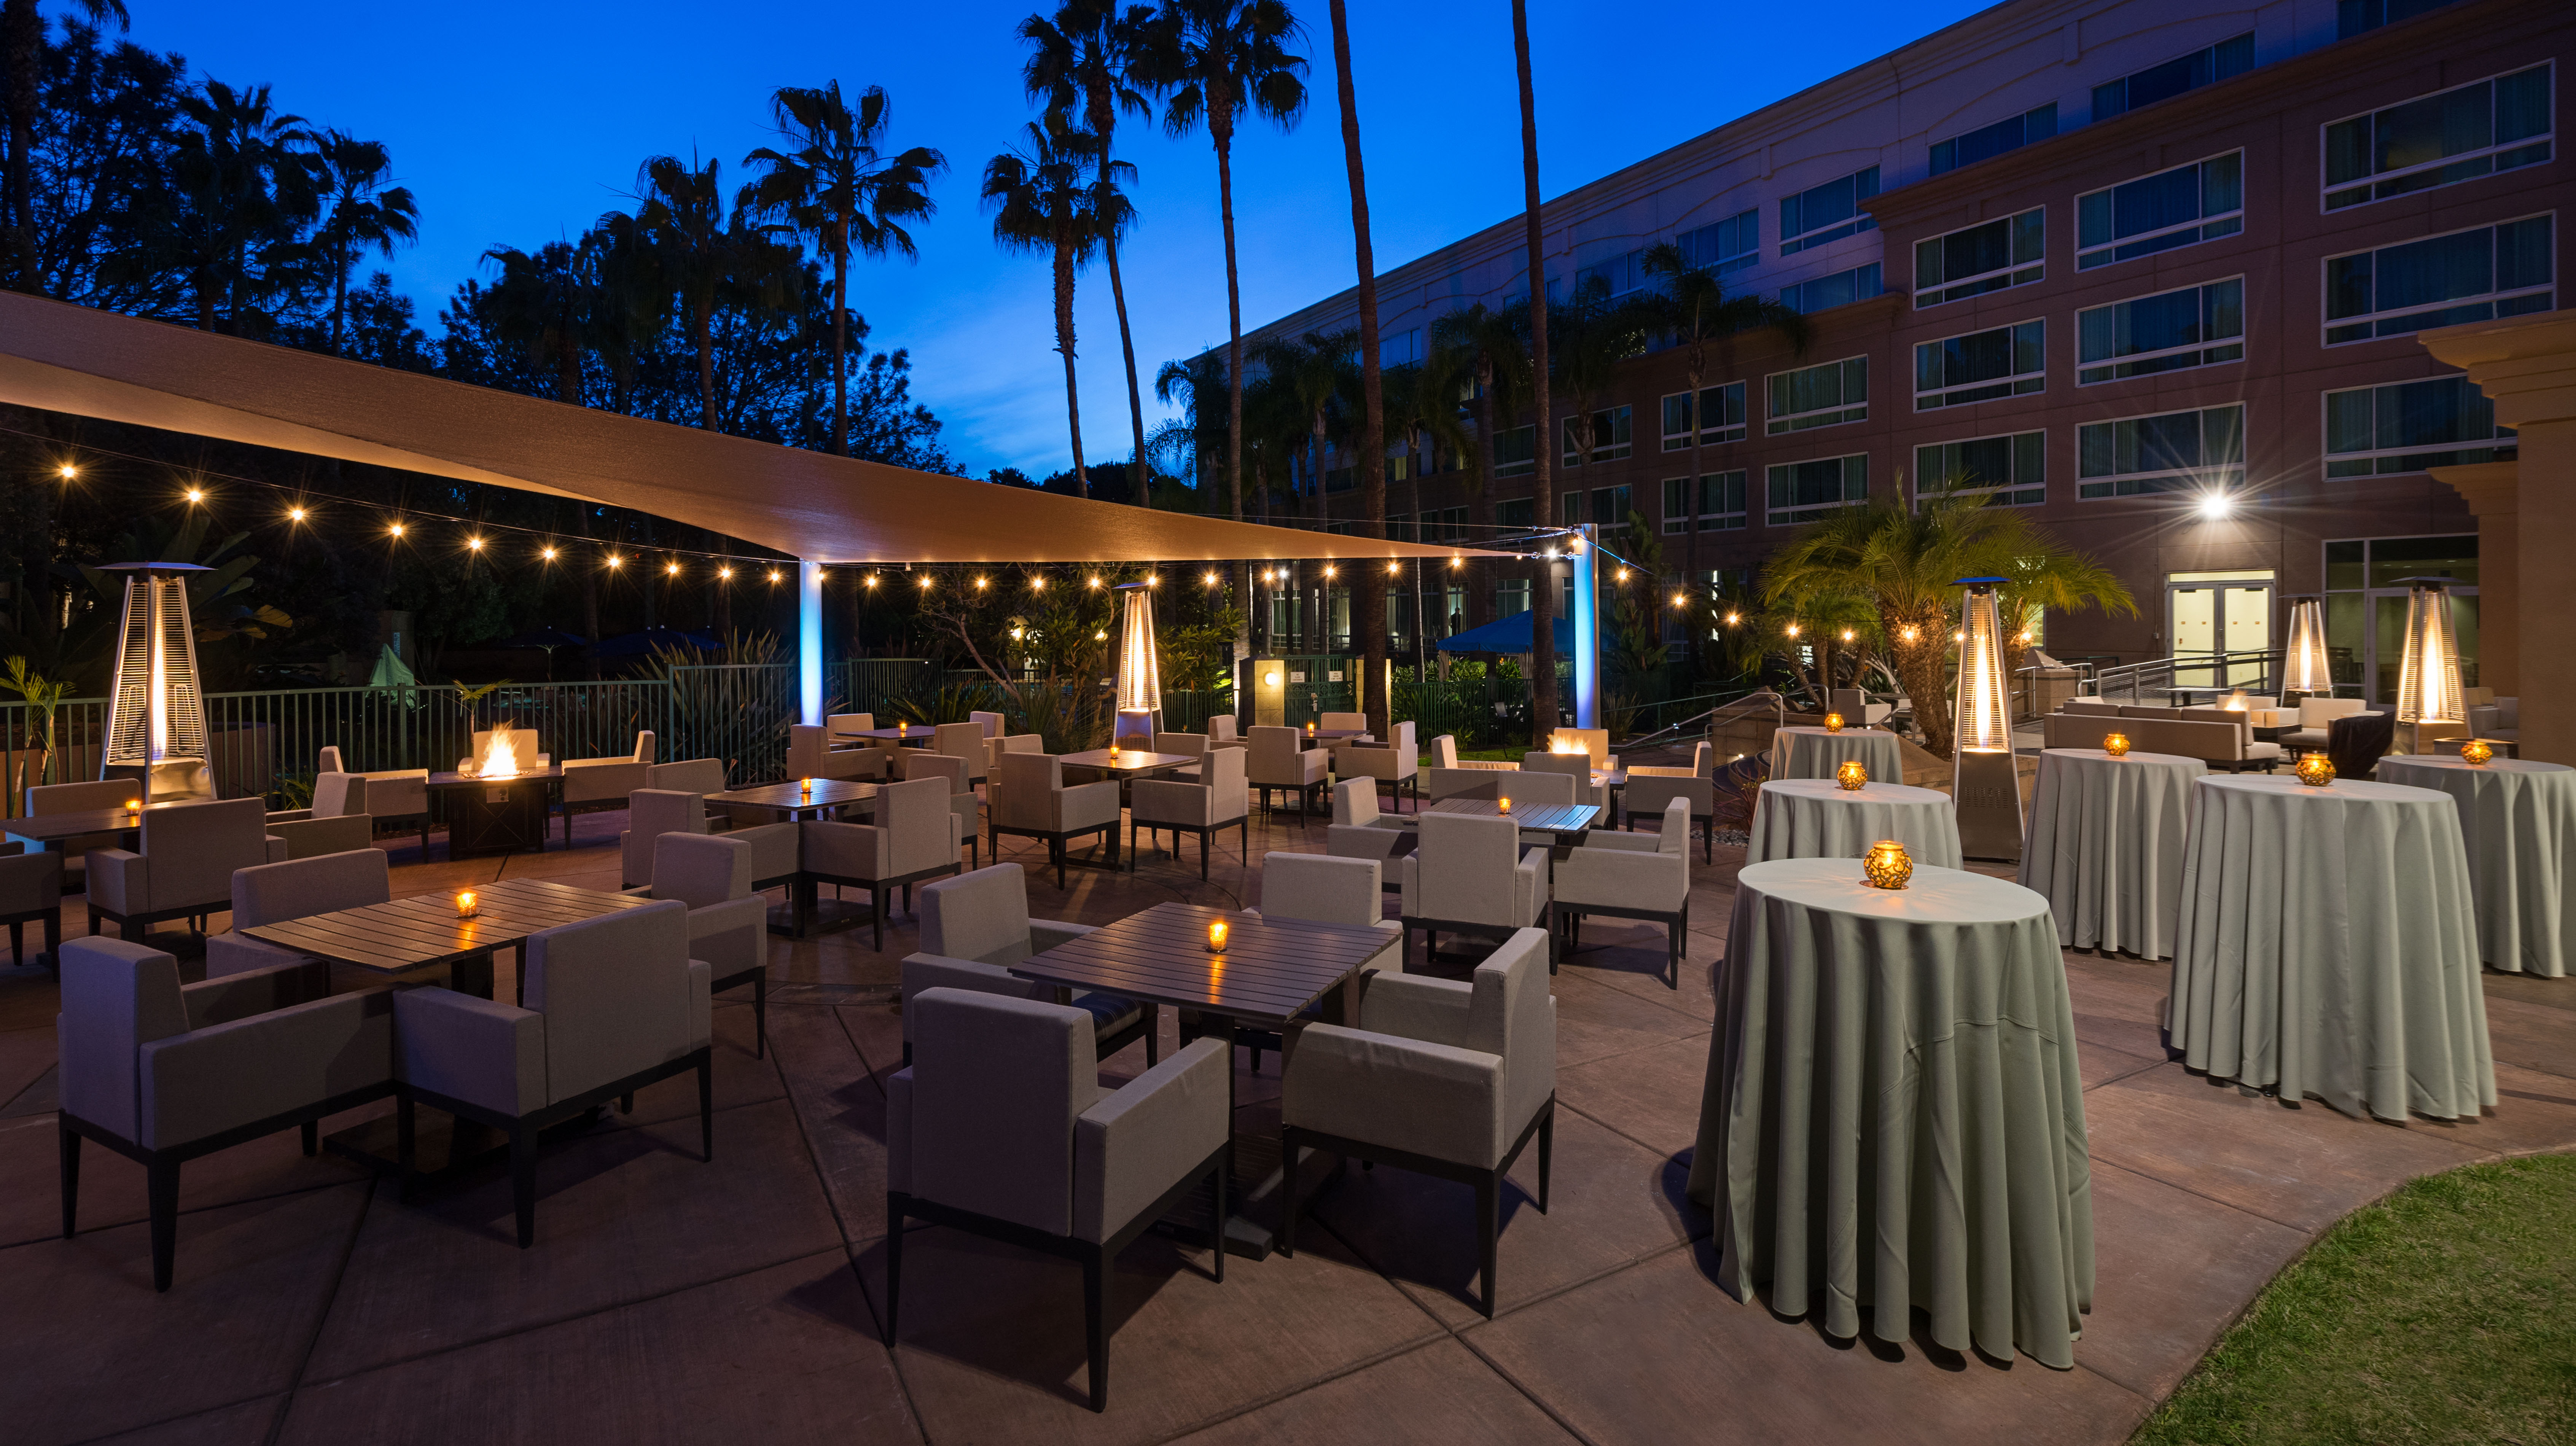 Outdoor Patio at Dusk with Lounge Seating and Cocktail Tables